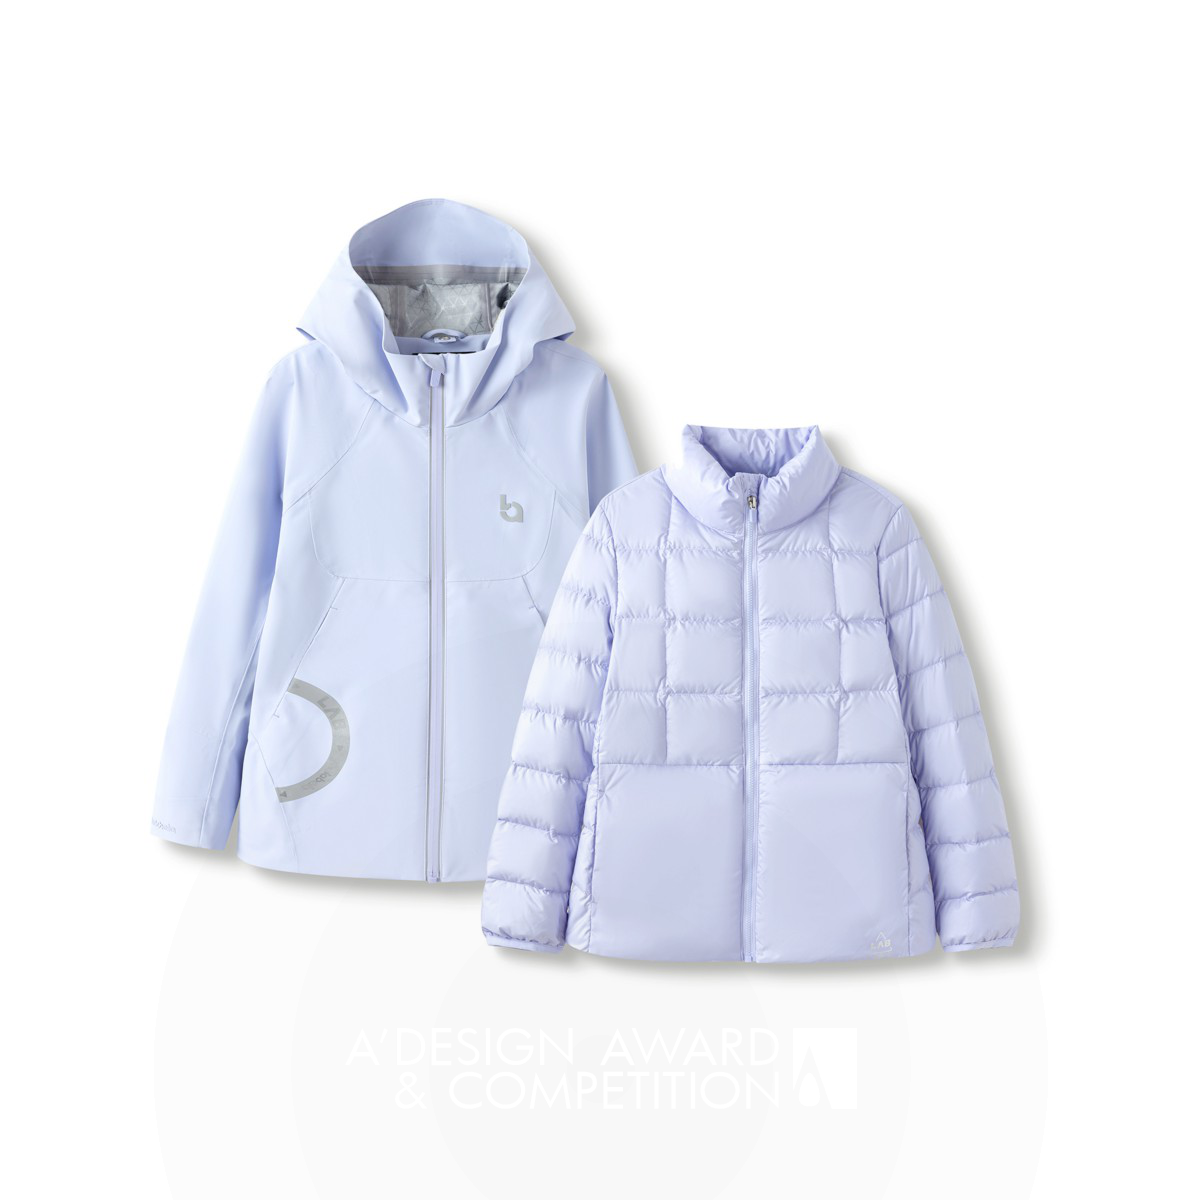 ZHE JIANG SEMIR GARMENT CO.,LTD. wins Bronze at the prestigious A' Baby, Kids and Children's Products Design Award with Growing Shell Down Jacket Kids&#039; Clothing.